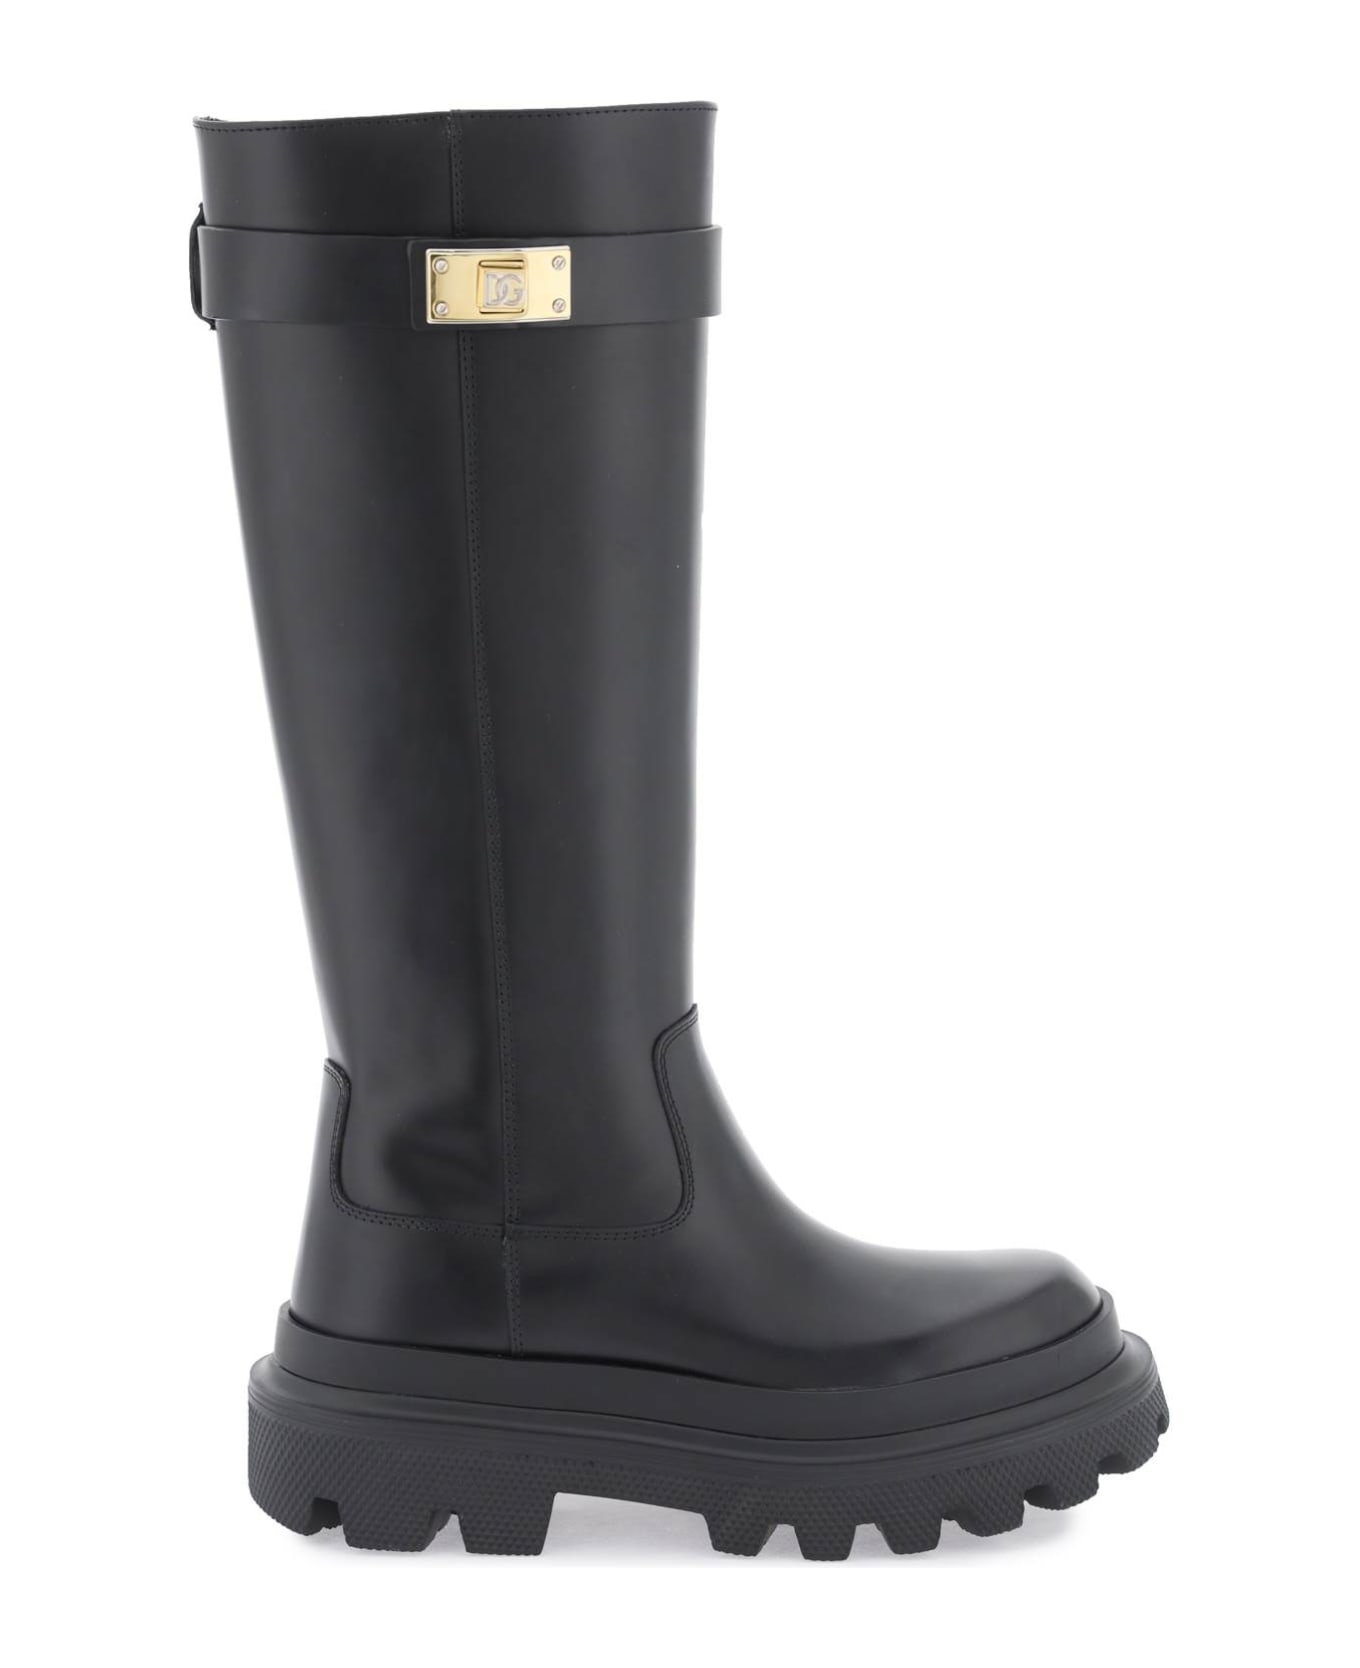 Dolce & Gabbana Leather Boots With Logoed Plaquee - Black